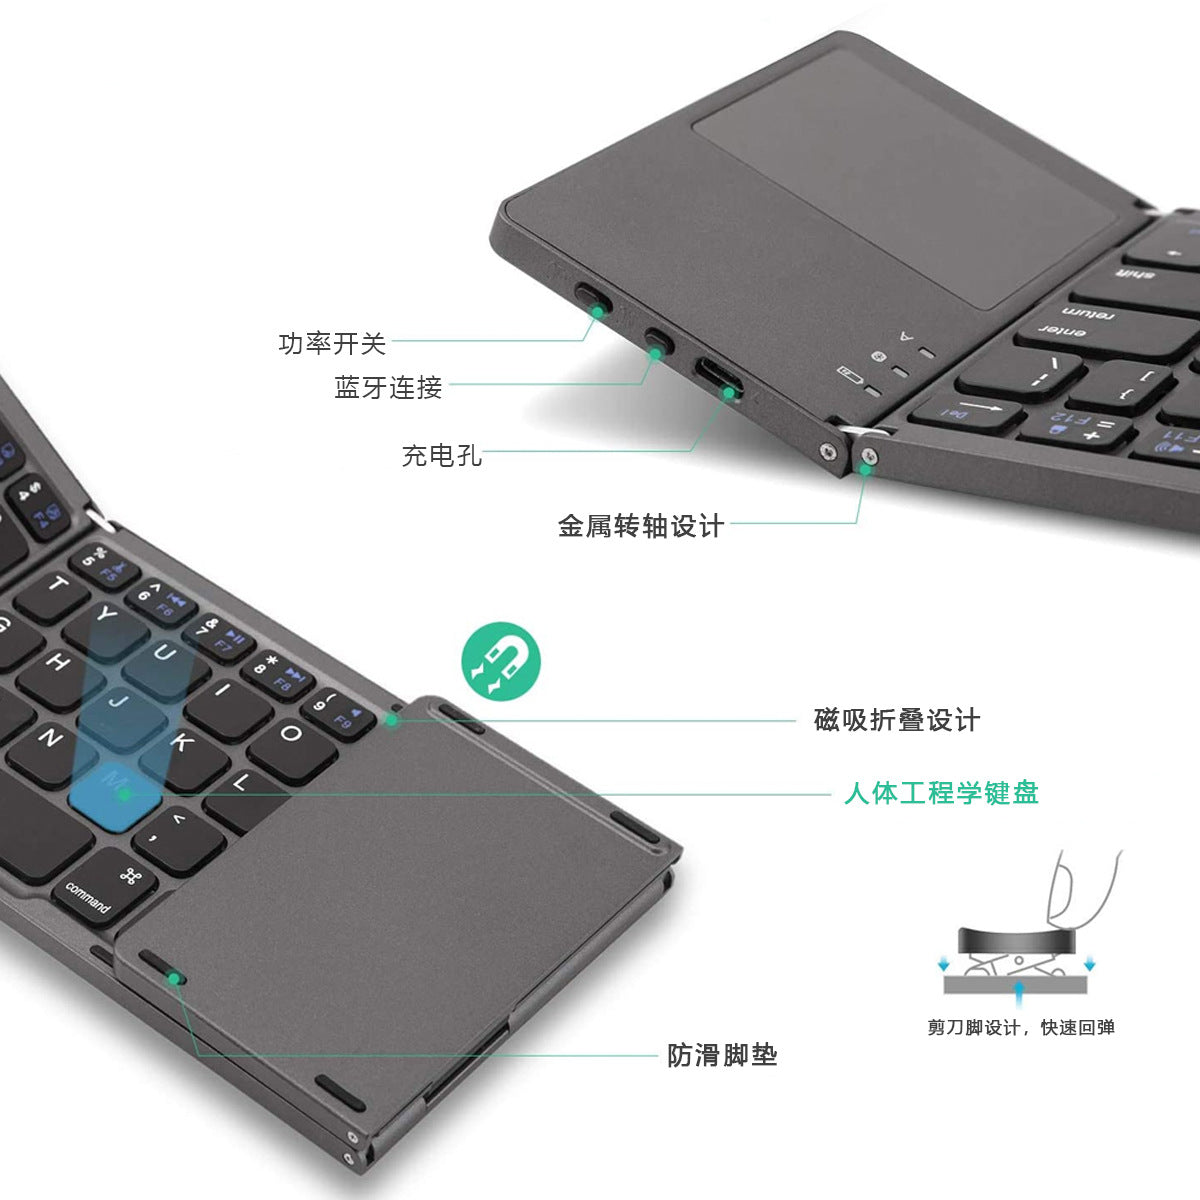 Wireless Bluetooth Ultra-thin Three-fold Keyboard Support Mobile Phone Tablet Notebook Foldable Rechargeable With Touchpad